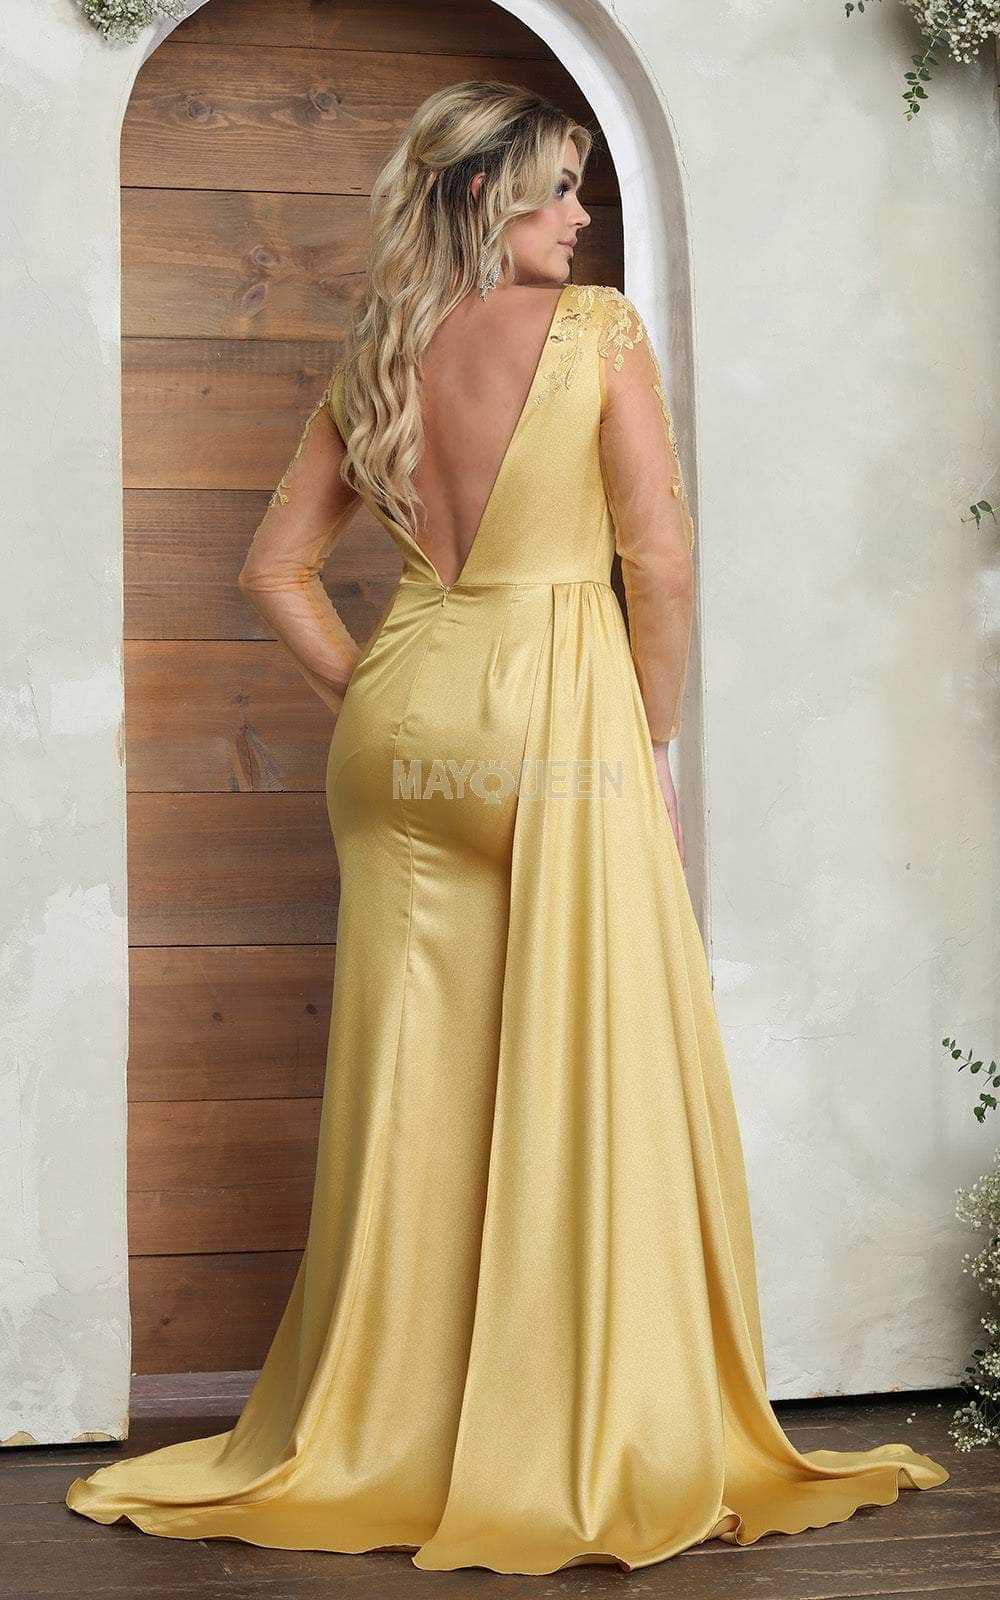 May Queen, May Queen RQ8045 - Sheer Long Sleeve Ruched Prom Gown